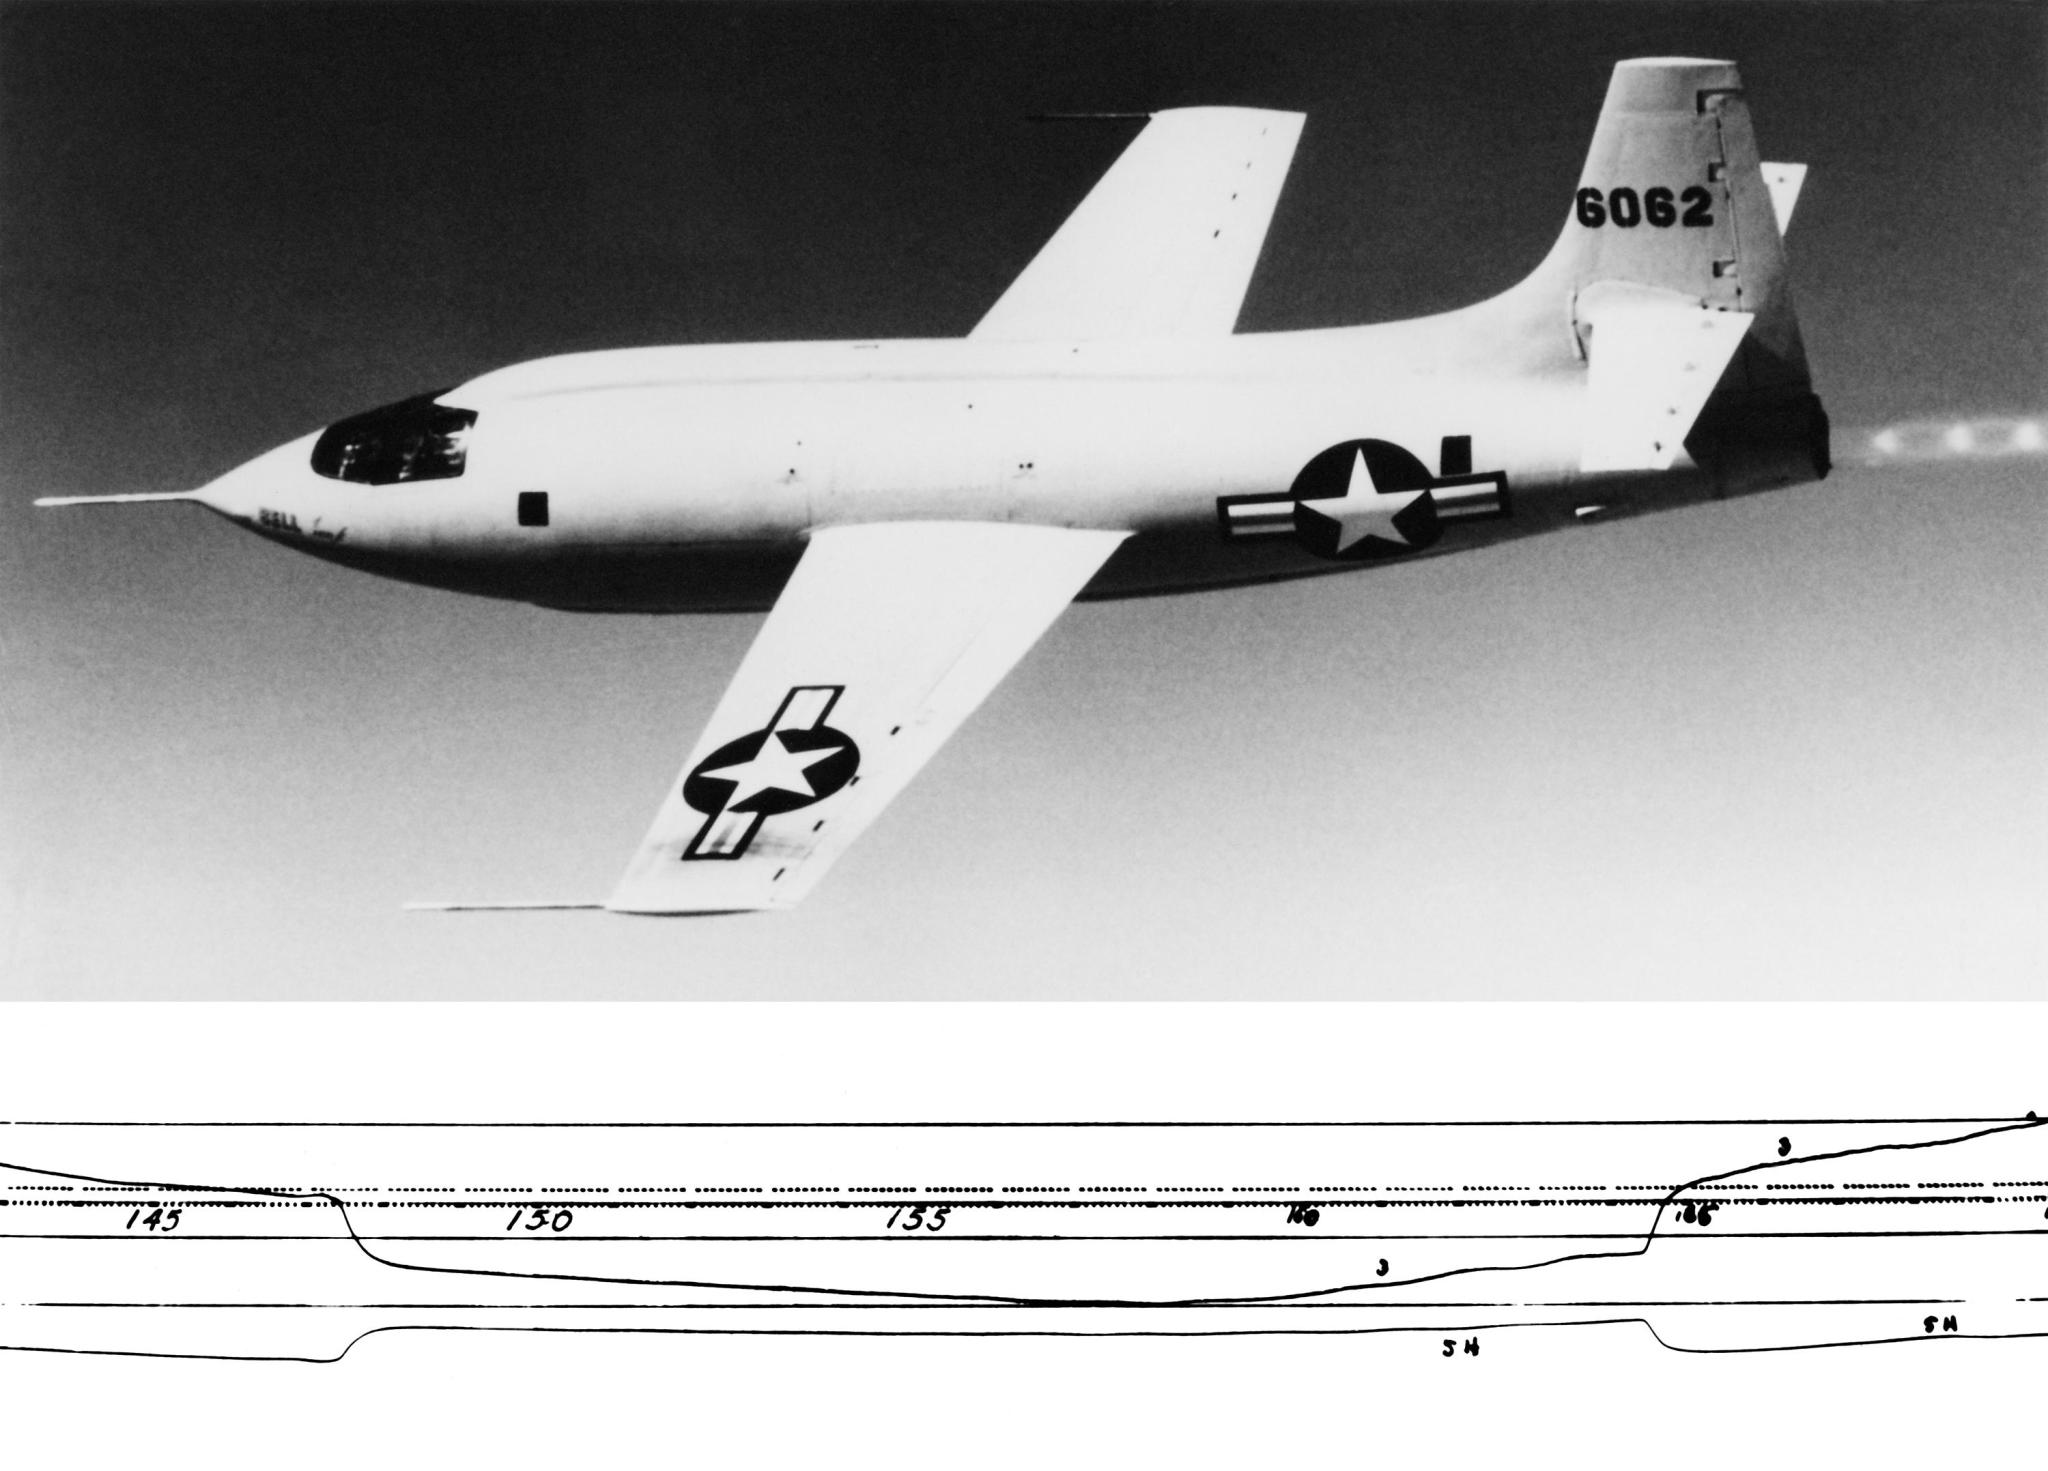 Black and white photo of the Bell X-1 in flight.